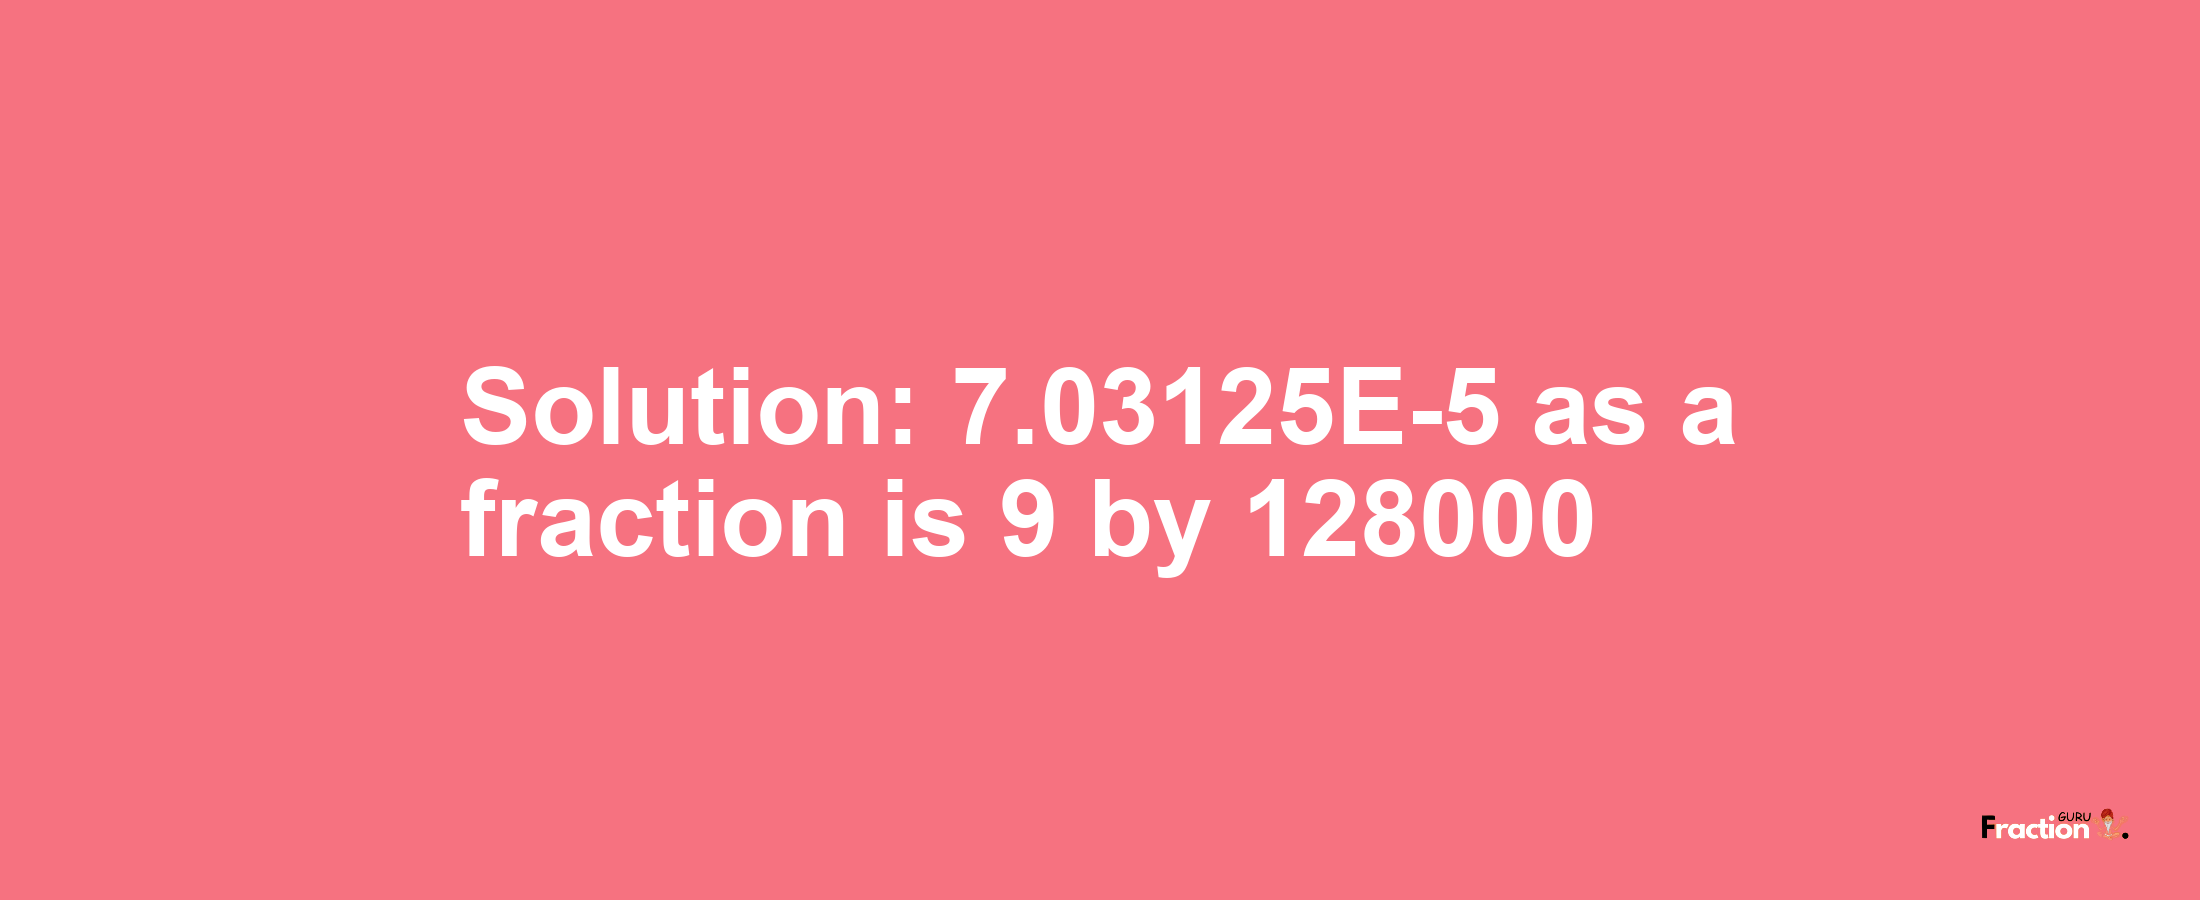 Solution:7.03125E-5 as a fraction is 9/128000